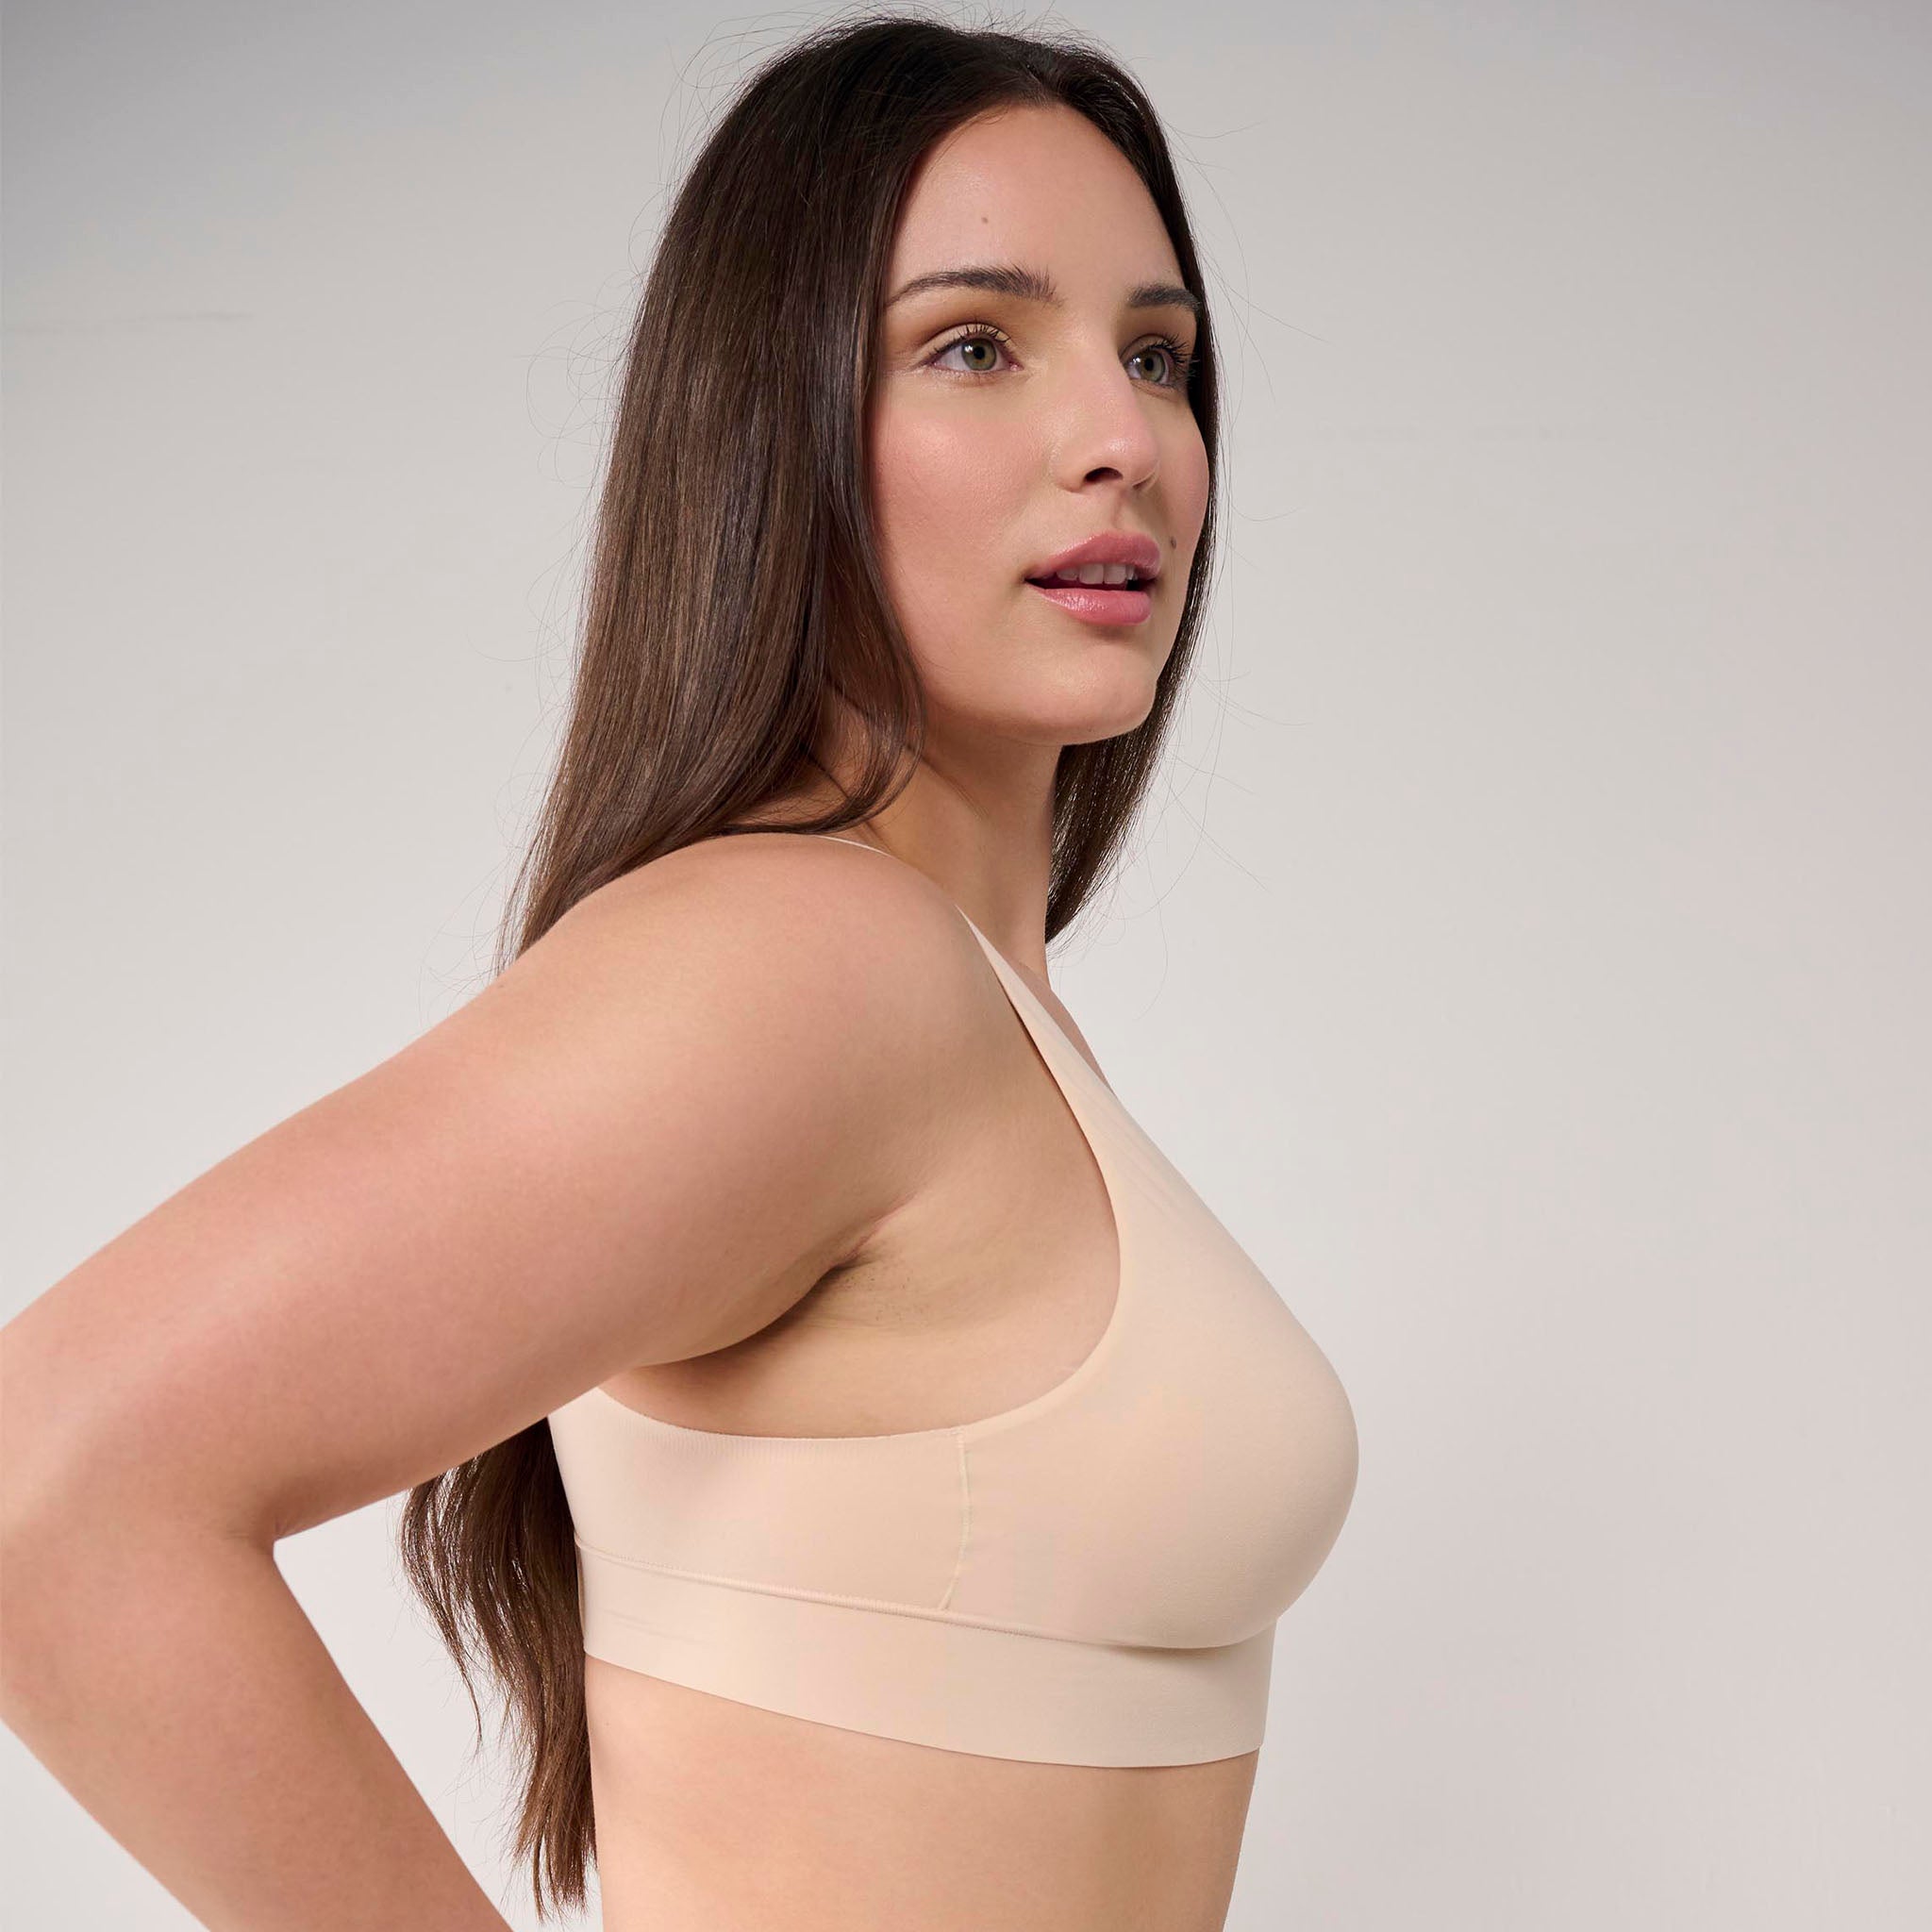 Floatley - Look no more! Slip into the Cozy Bra for the ultimate comfort  and style. Designed to fit your body so well, you'll forget it's even  there! #Floatley #WeFloat #Madeforcomfort #Cozy #